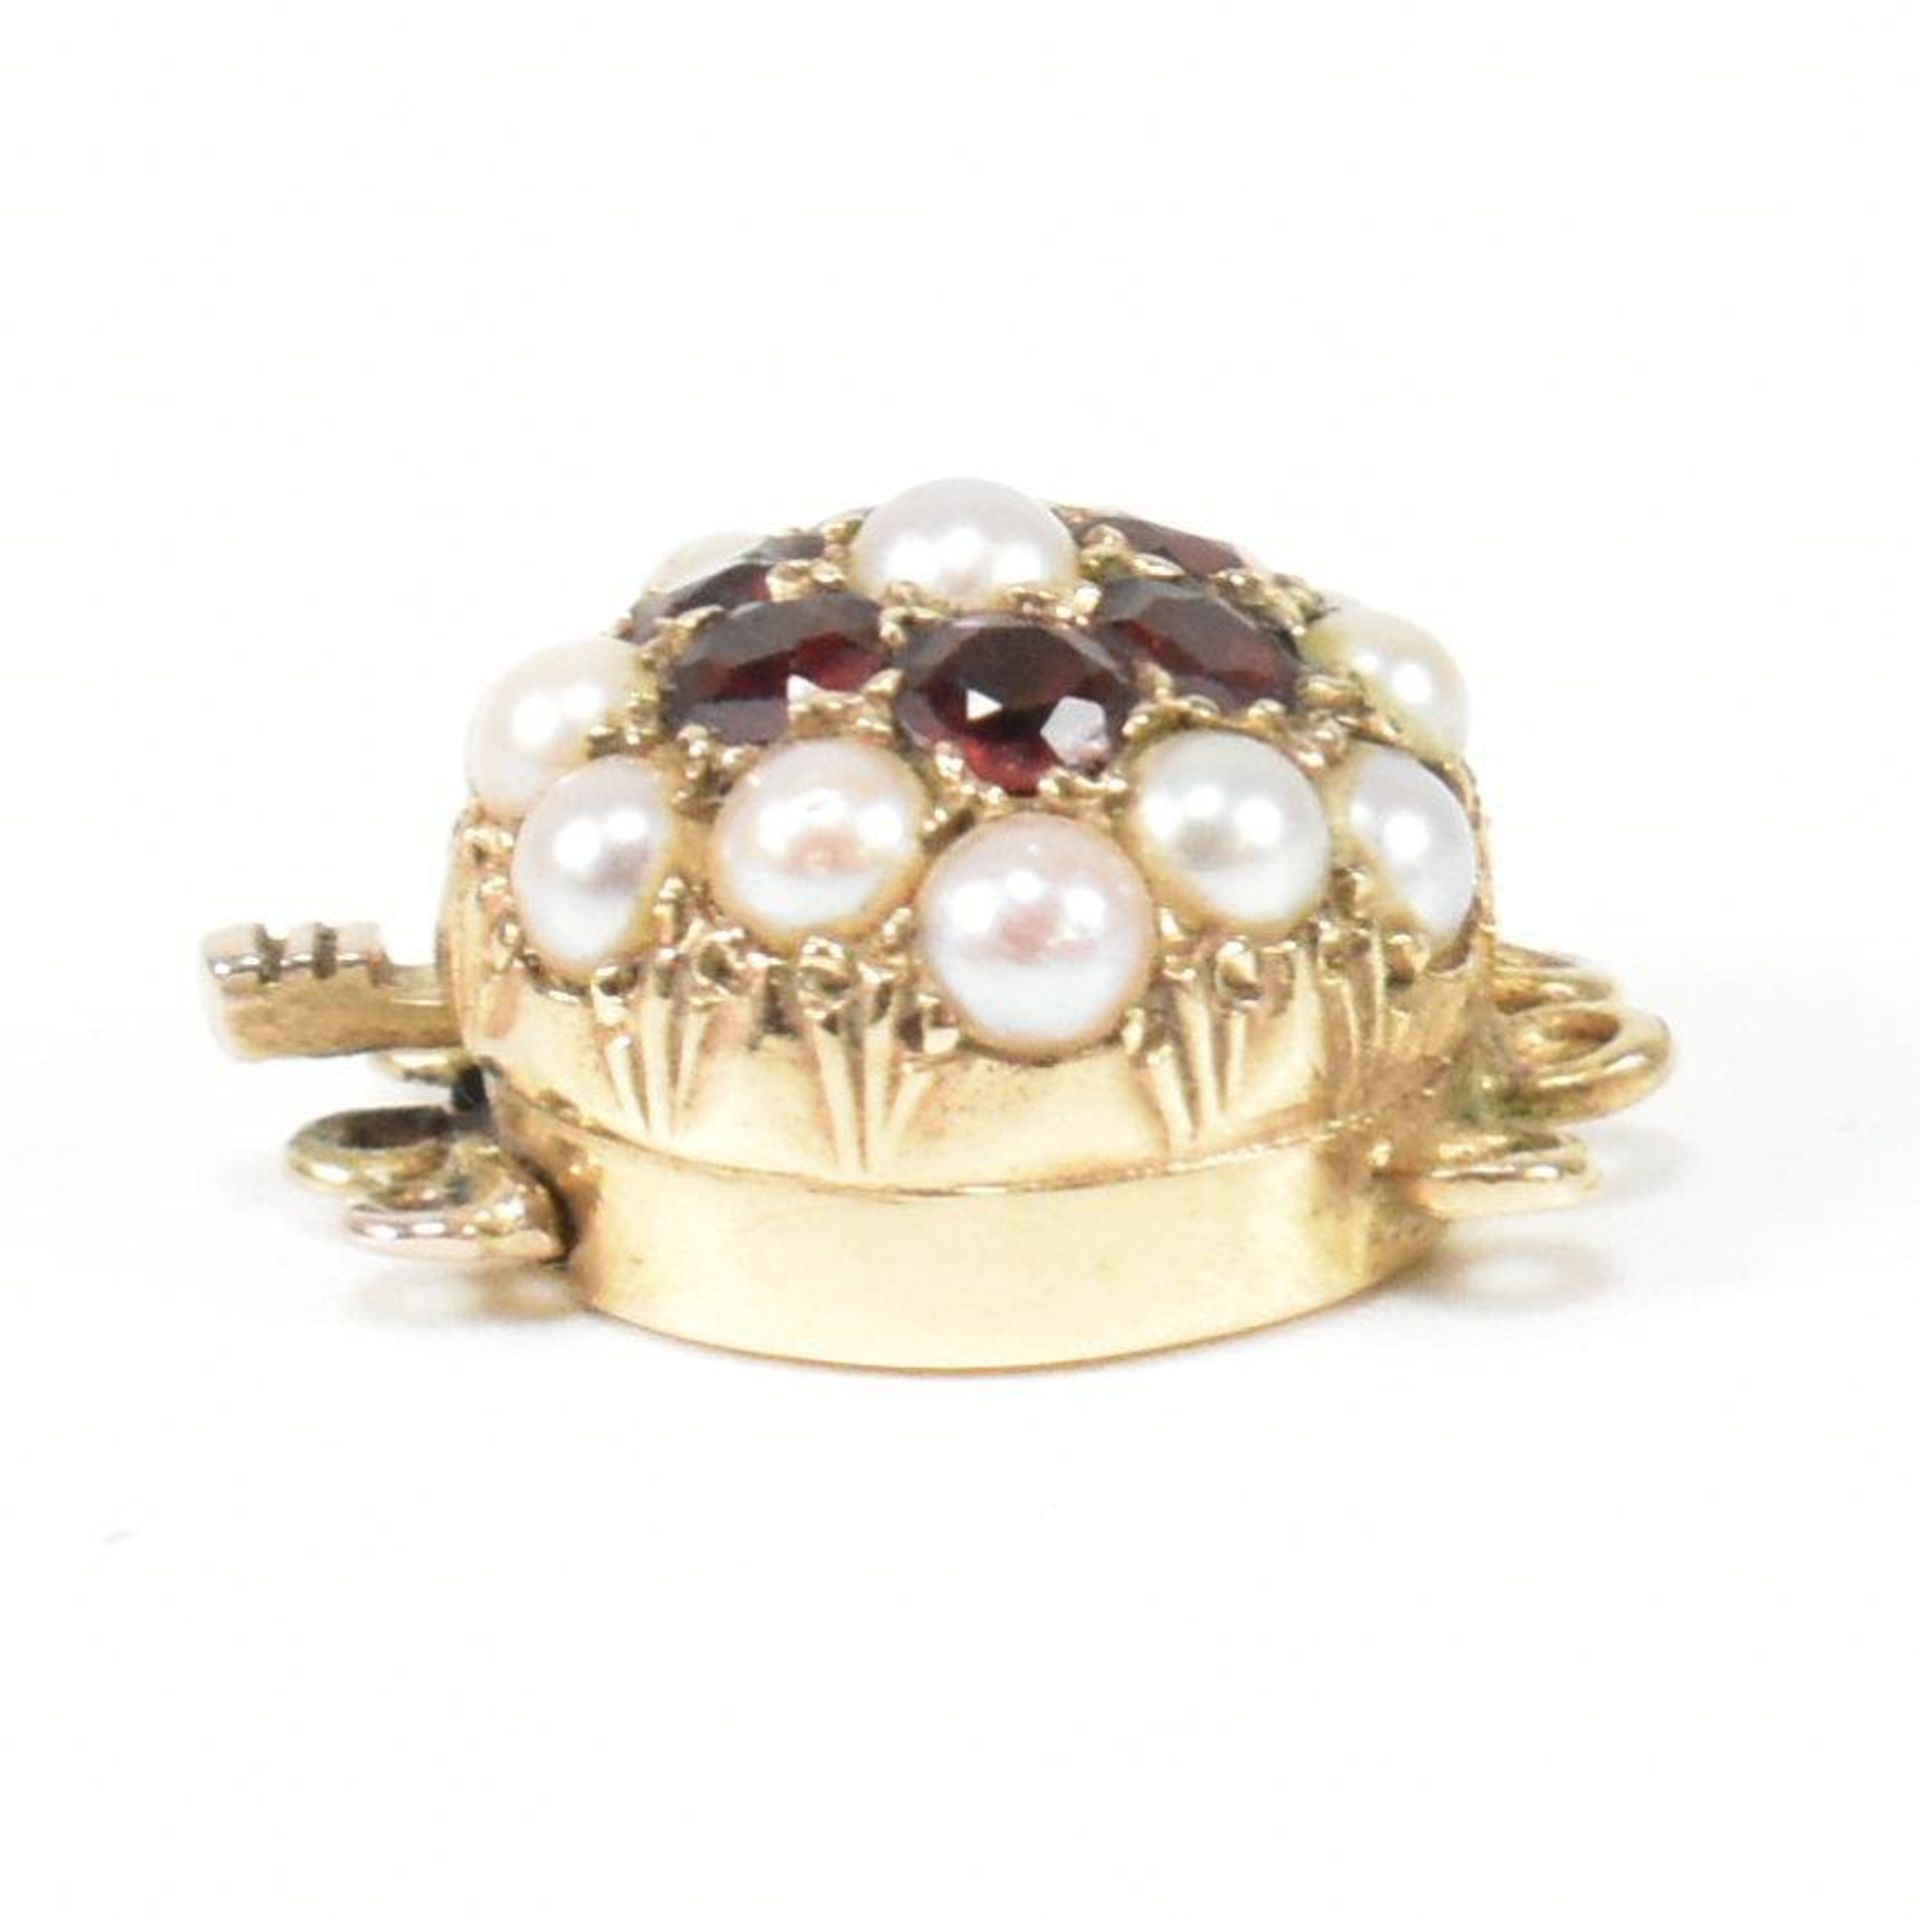 HALLMARKED 9CT GOLD PEARL & GARNET CLUSTER NECKLACE BOX CLASP - Image 7 of 7